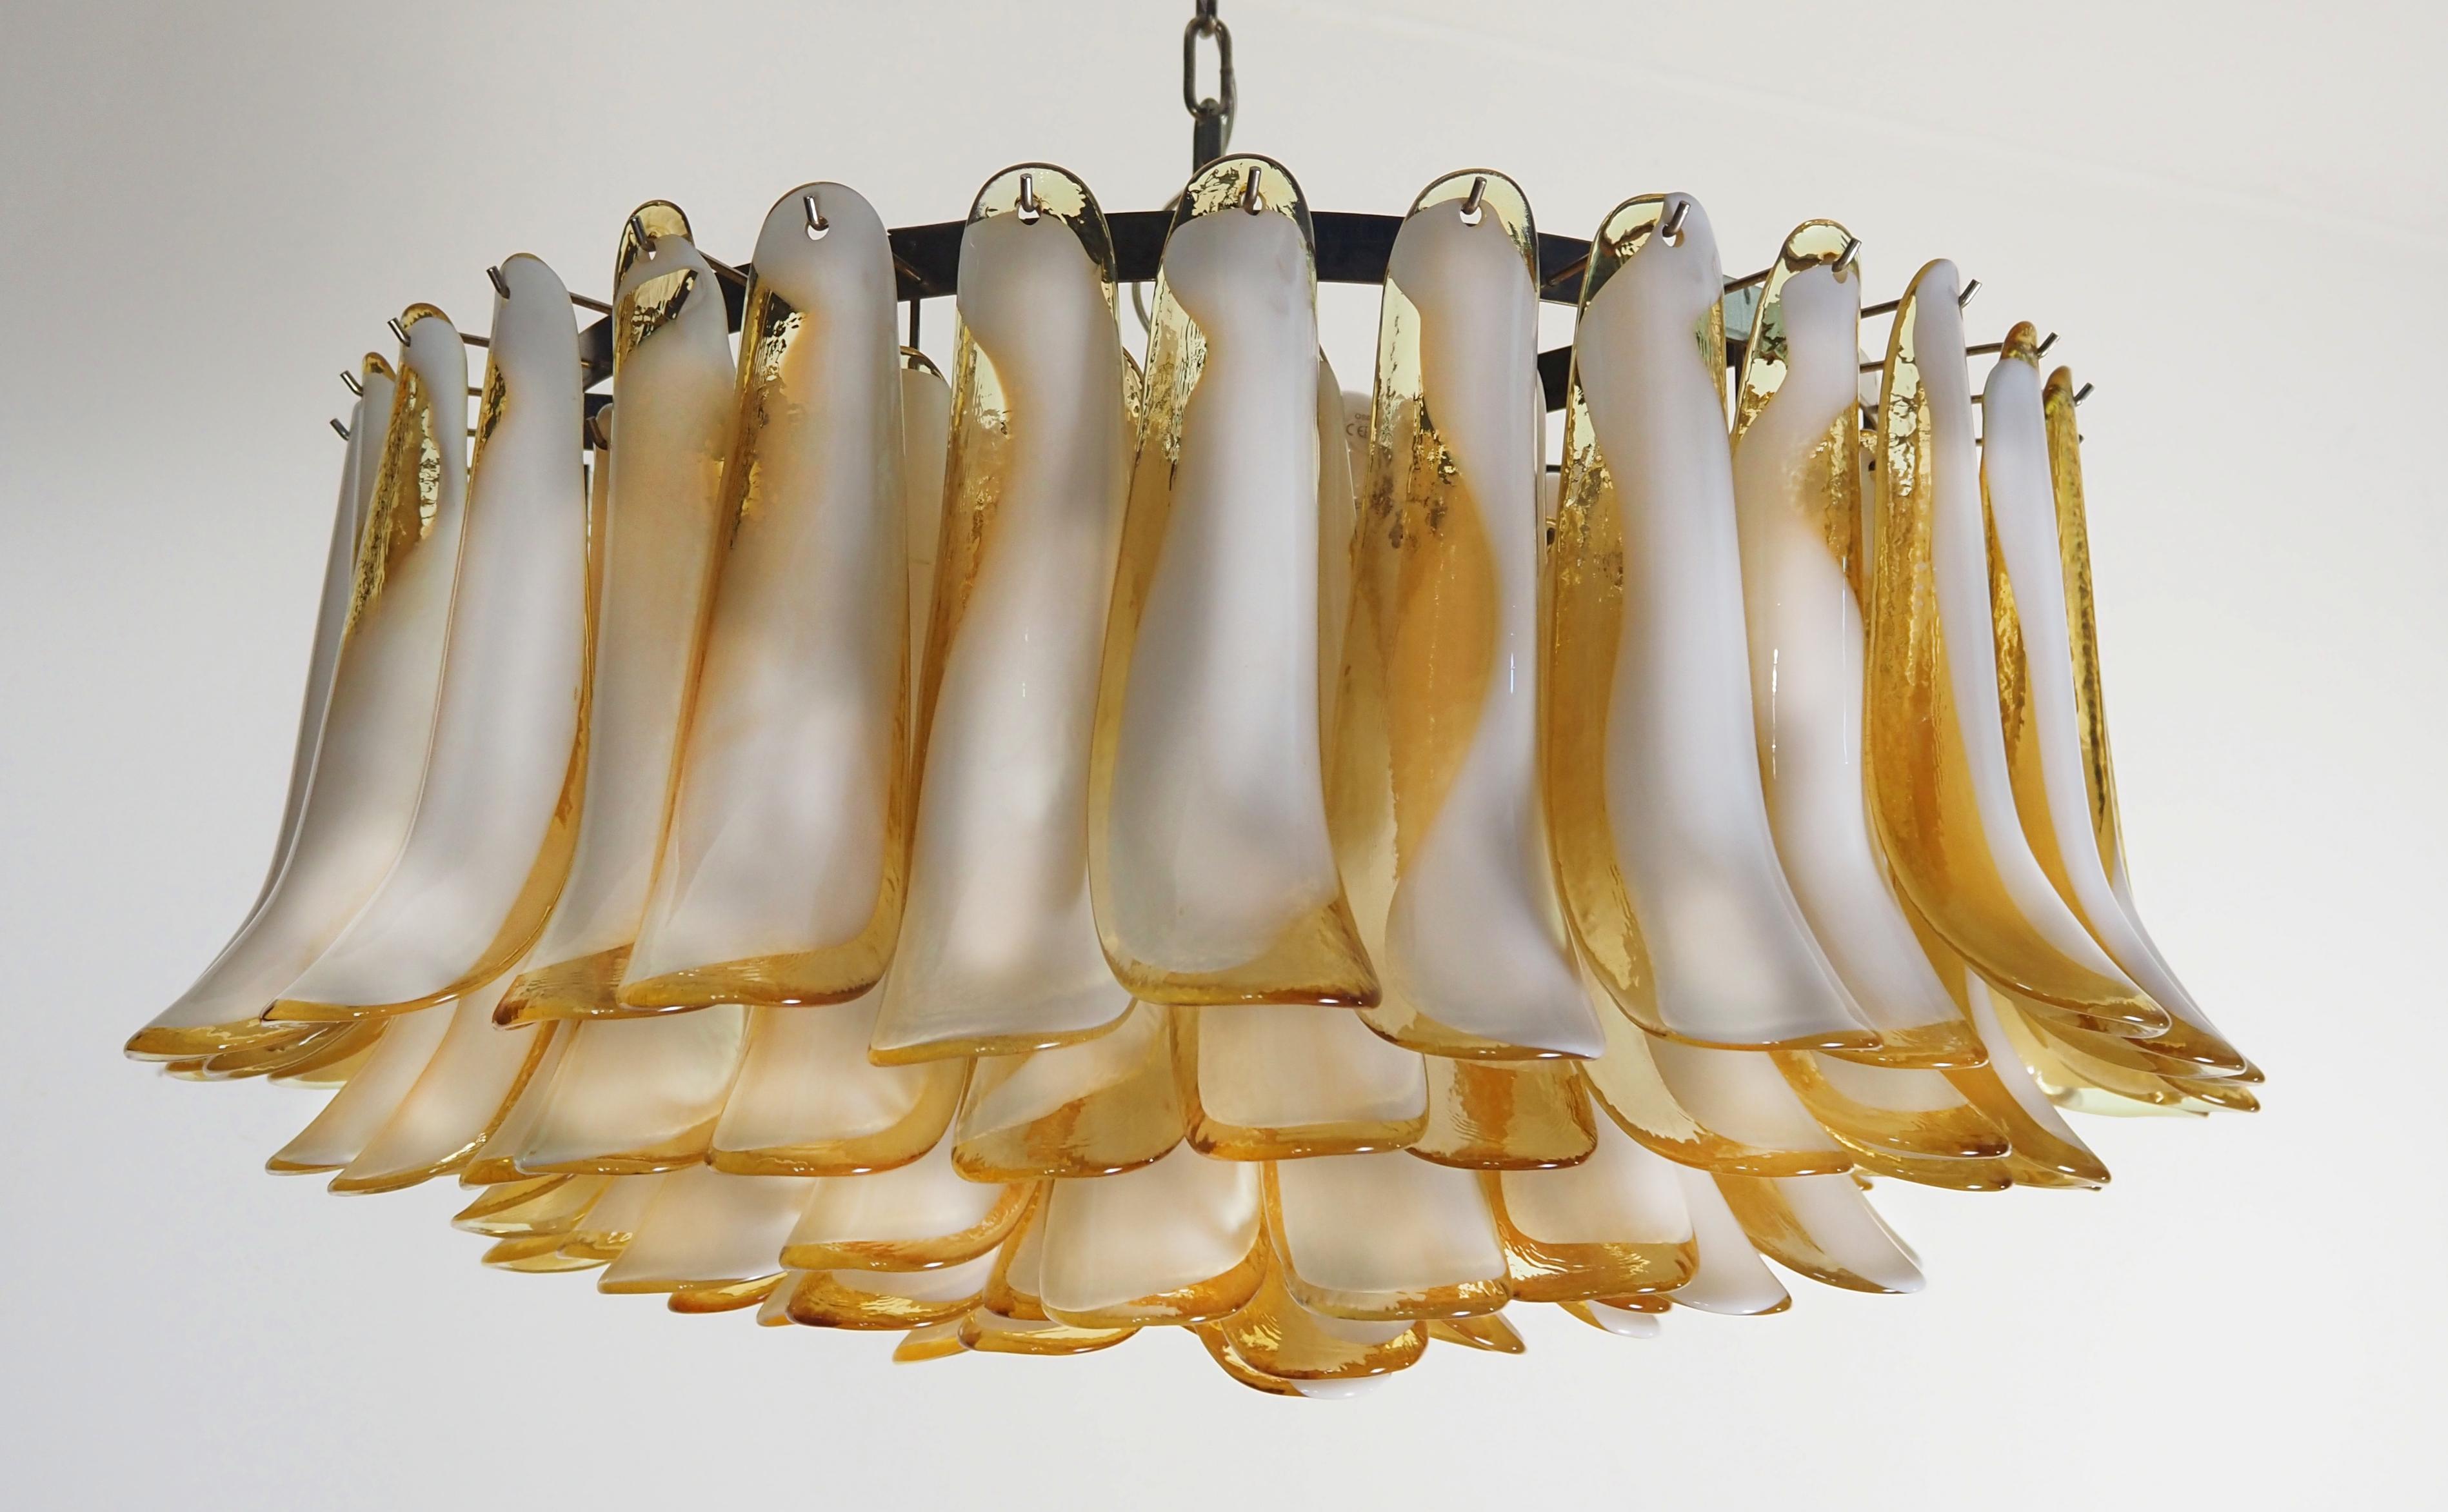 Italian vintage chandelier in Murano glass and nickel plated metal frame. The armor polished nickel supports 101 glass petals (amber and white “lattimo”) that give a very elegant look. Can be used as a chandelier with chain, or as a ceiling light,